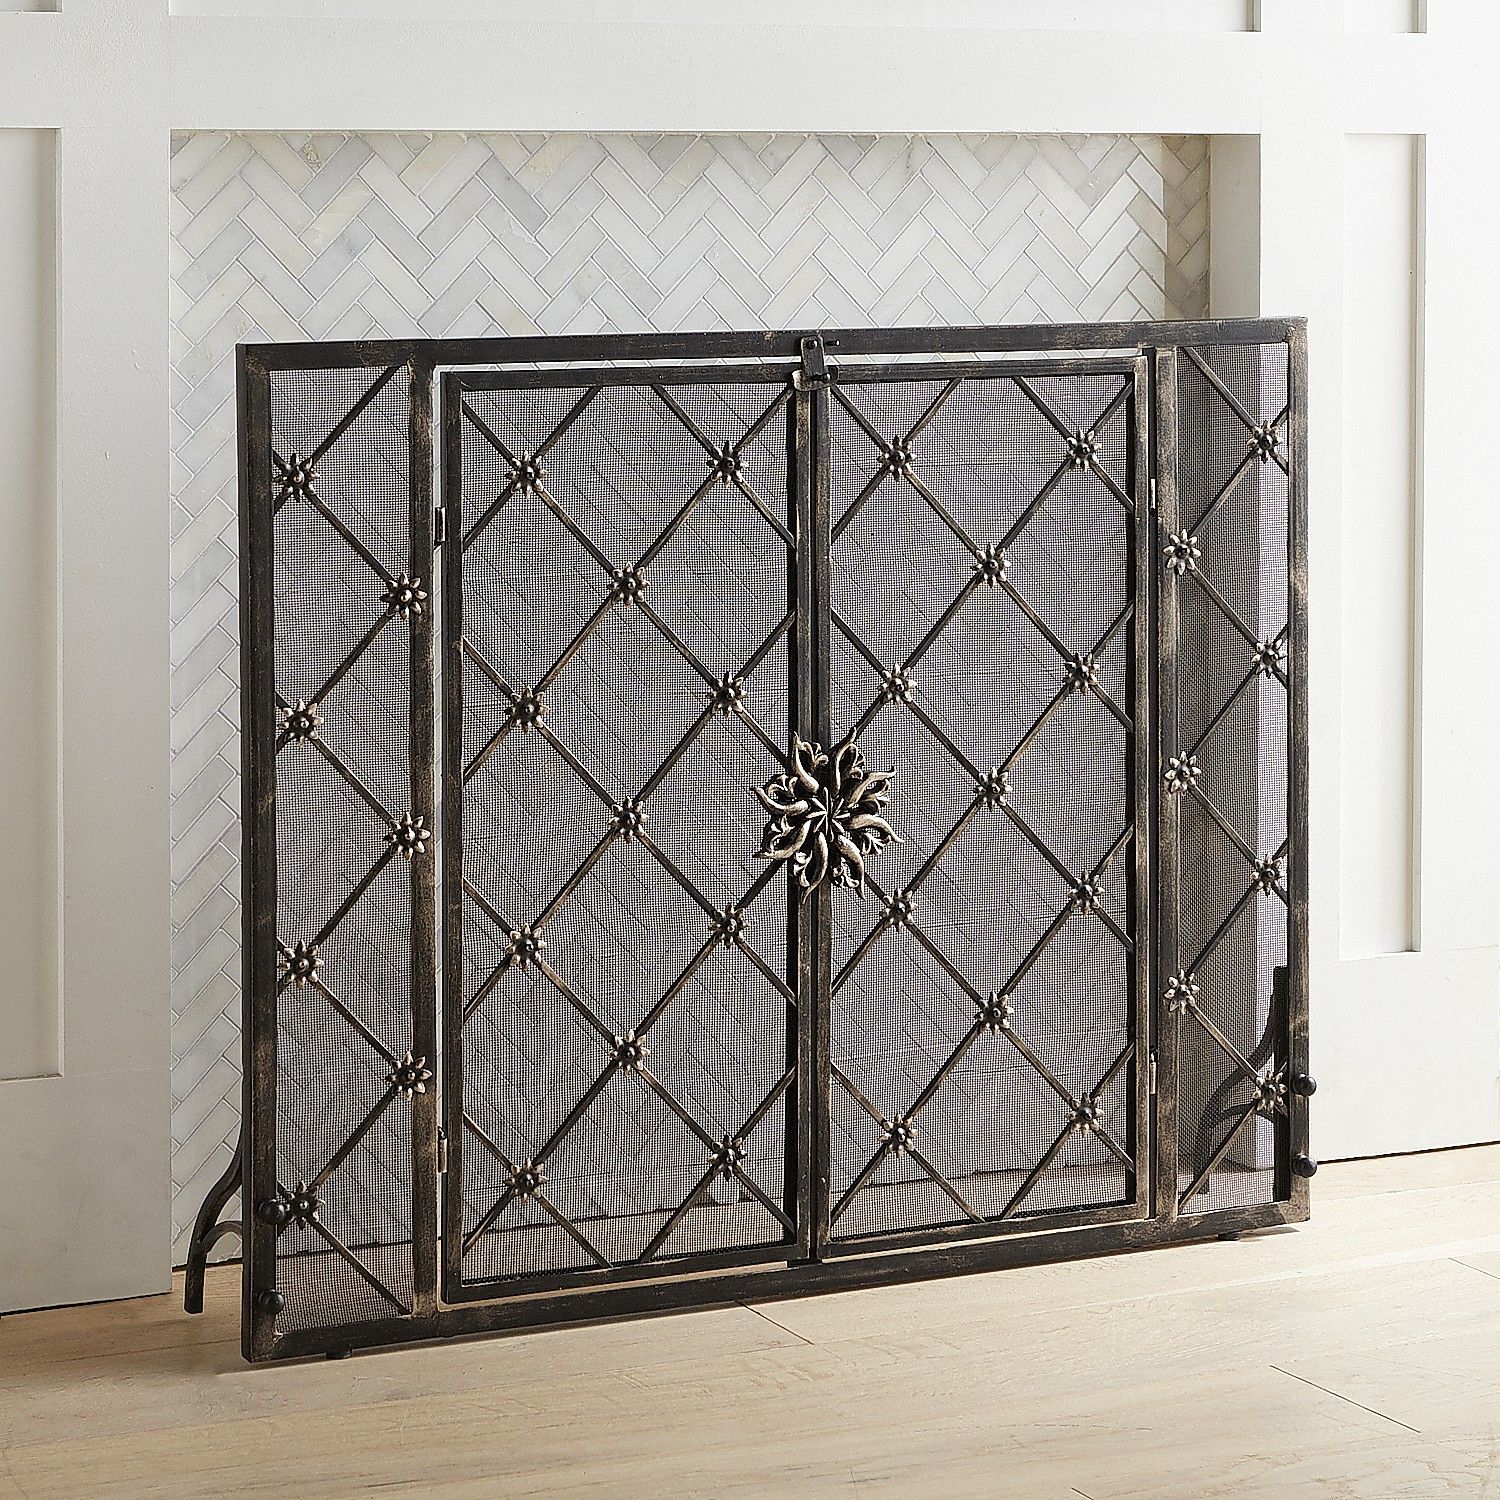 Painted Fireplace Screen Elegant Junction Fireplace Screen In 2019 Products